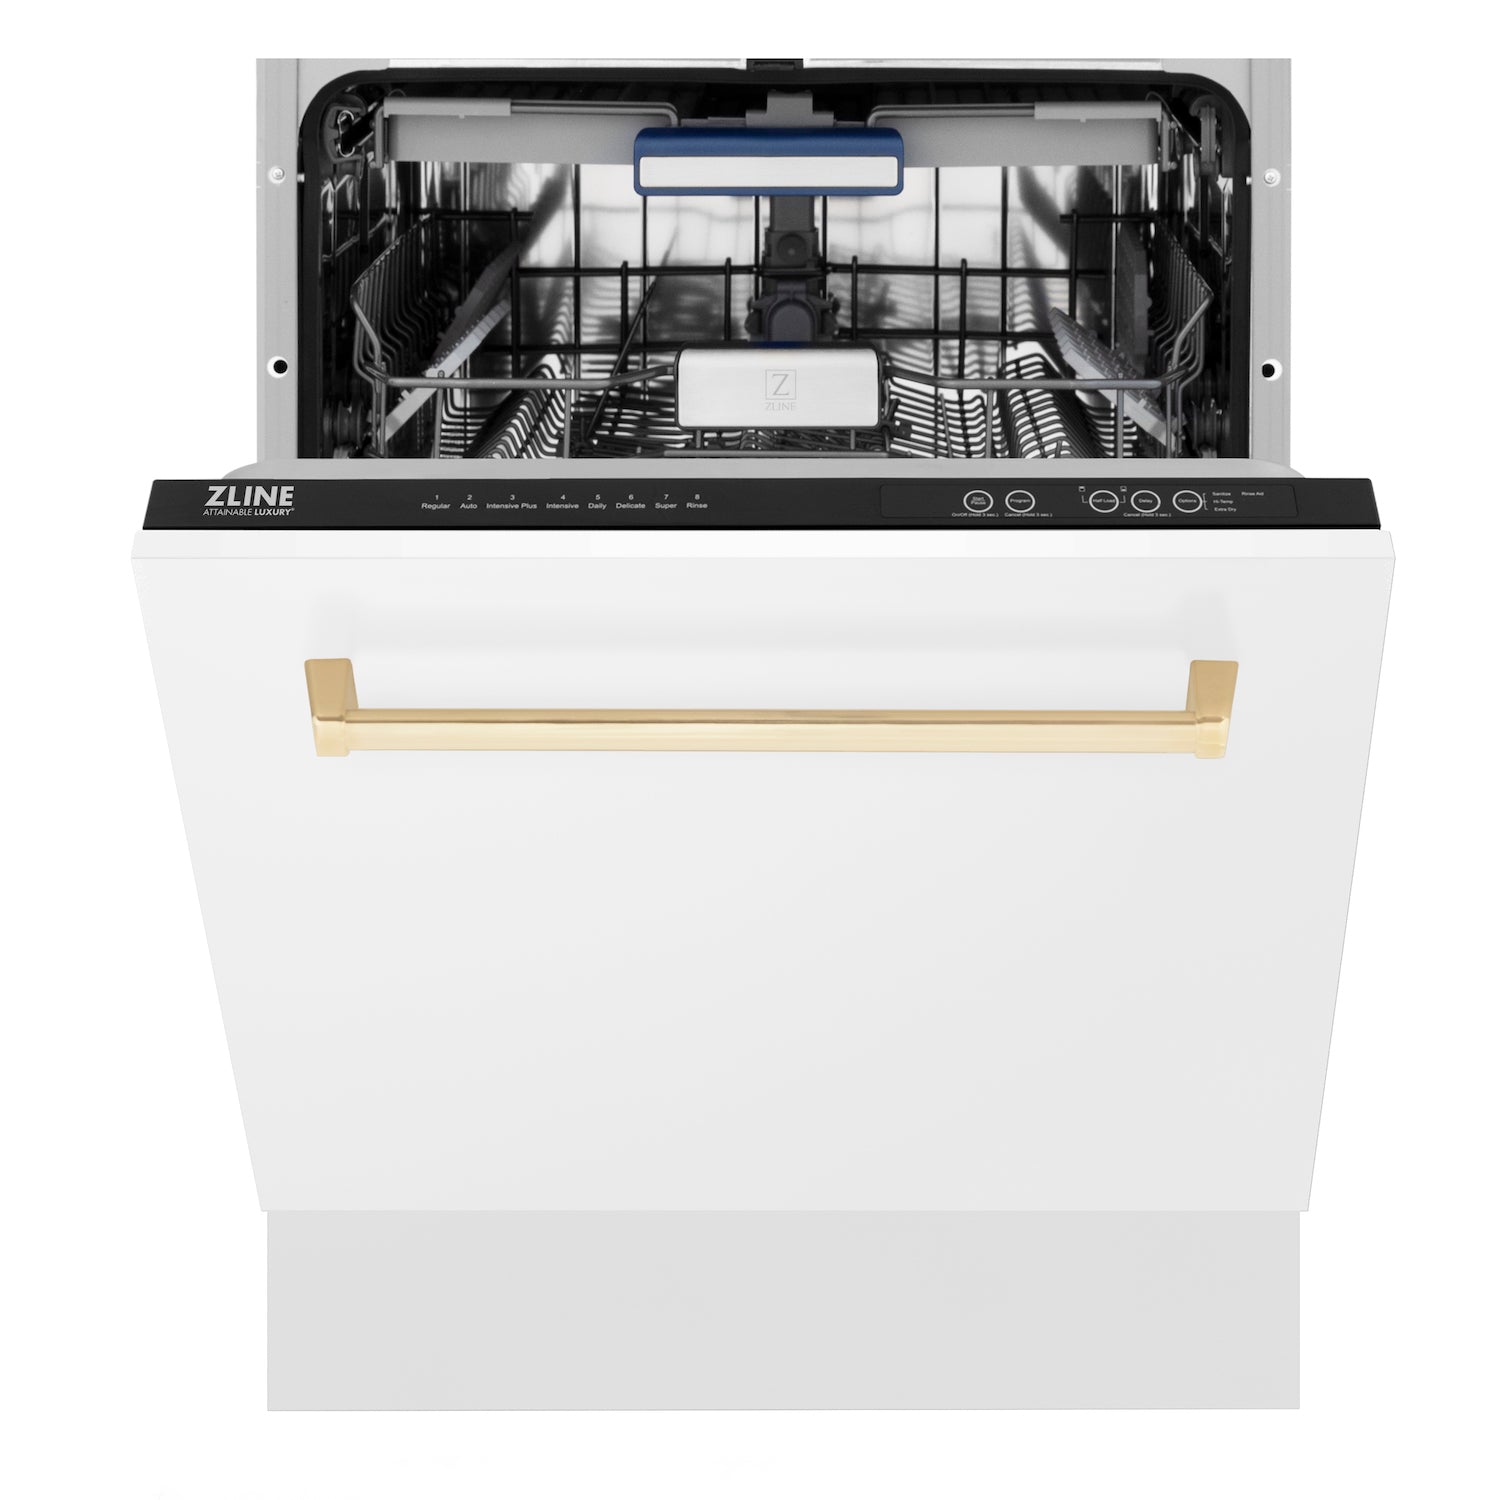 ZLINE Autograph Edition 24" Tall Tub Dishwasher in White Matte with Polished Gold Accent Handle (DWVZ-WM-24-G) front, door half open.